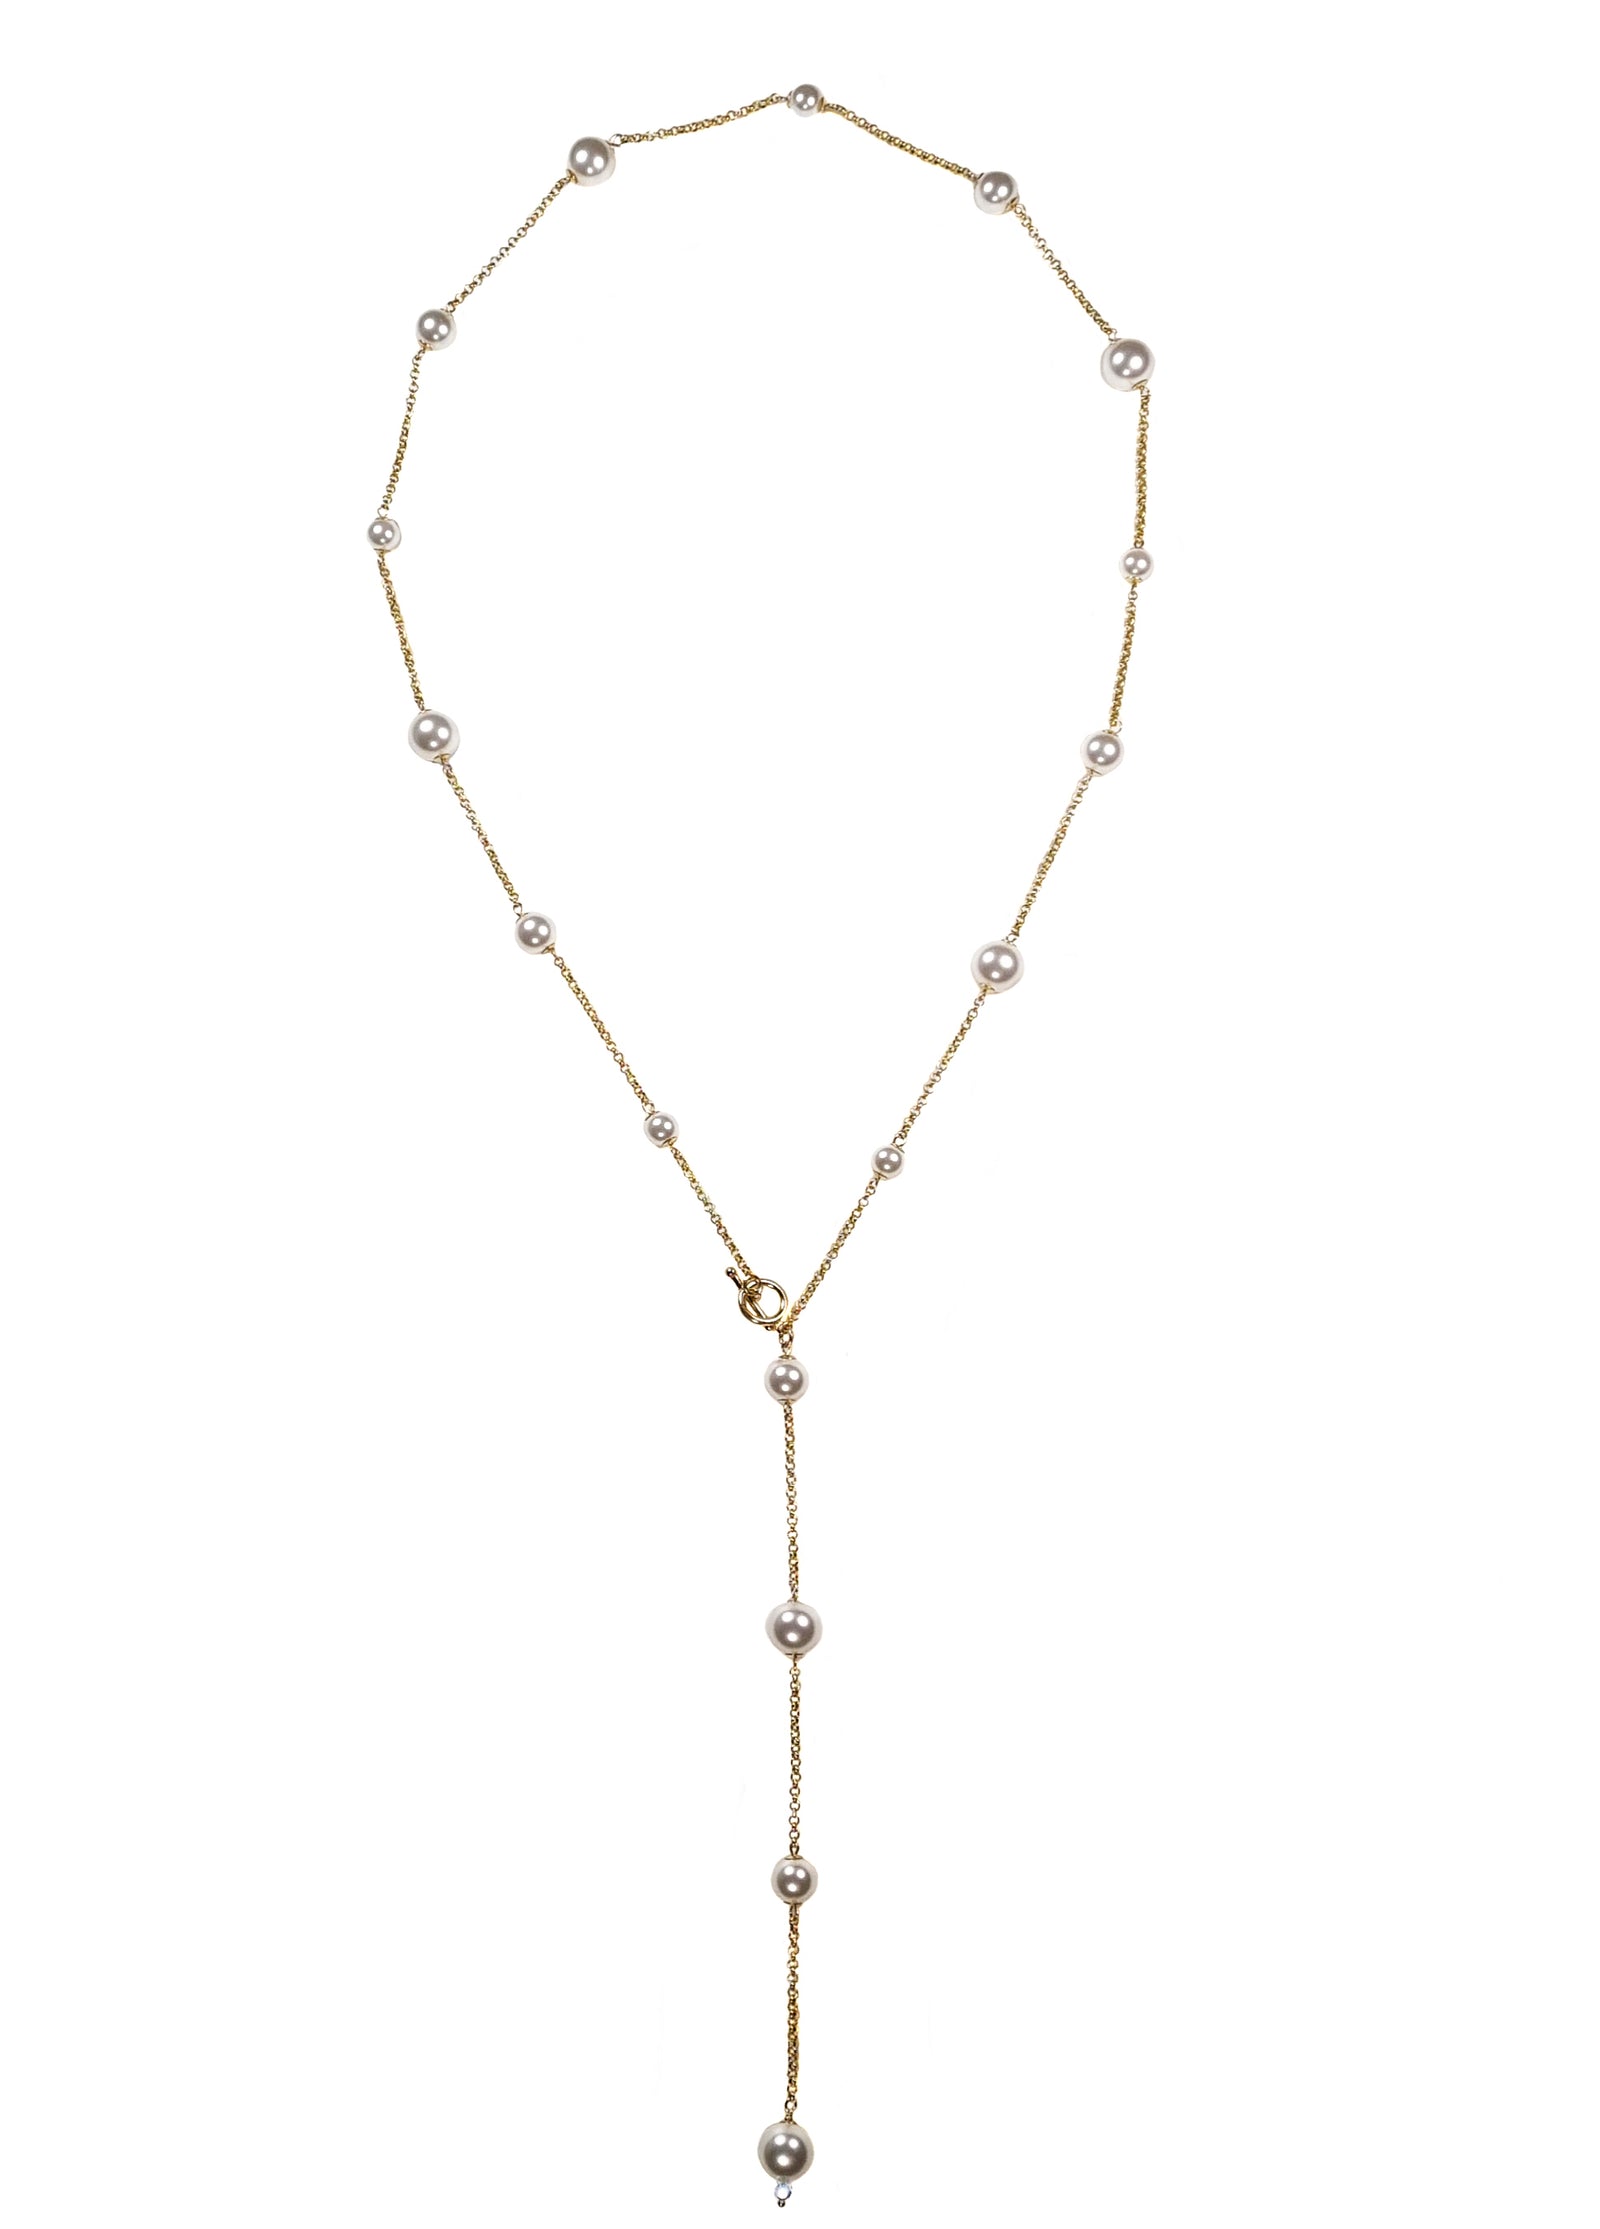 RENATA 14K Gold Filled Swarovski pearl Necklace OUT OF STOCK- Be back soon